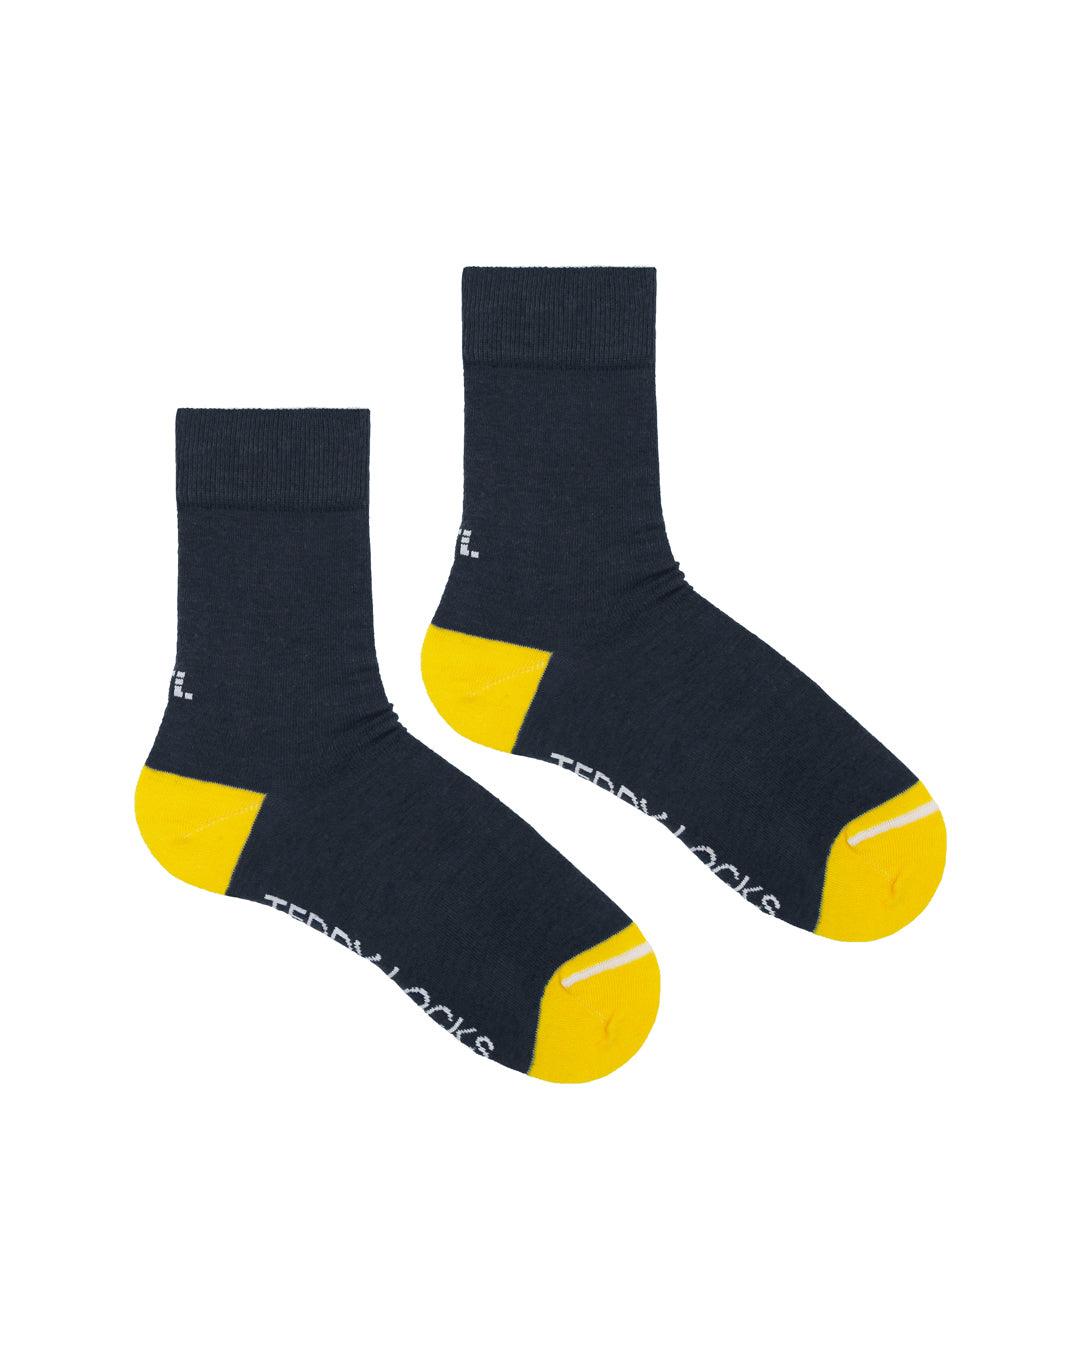 Ecofriendly socks made in the USA. Black socks with gold toes.